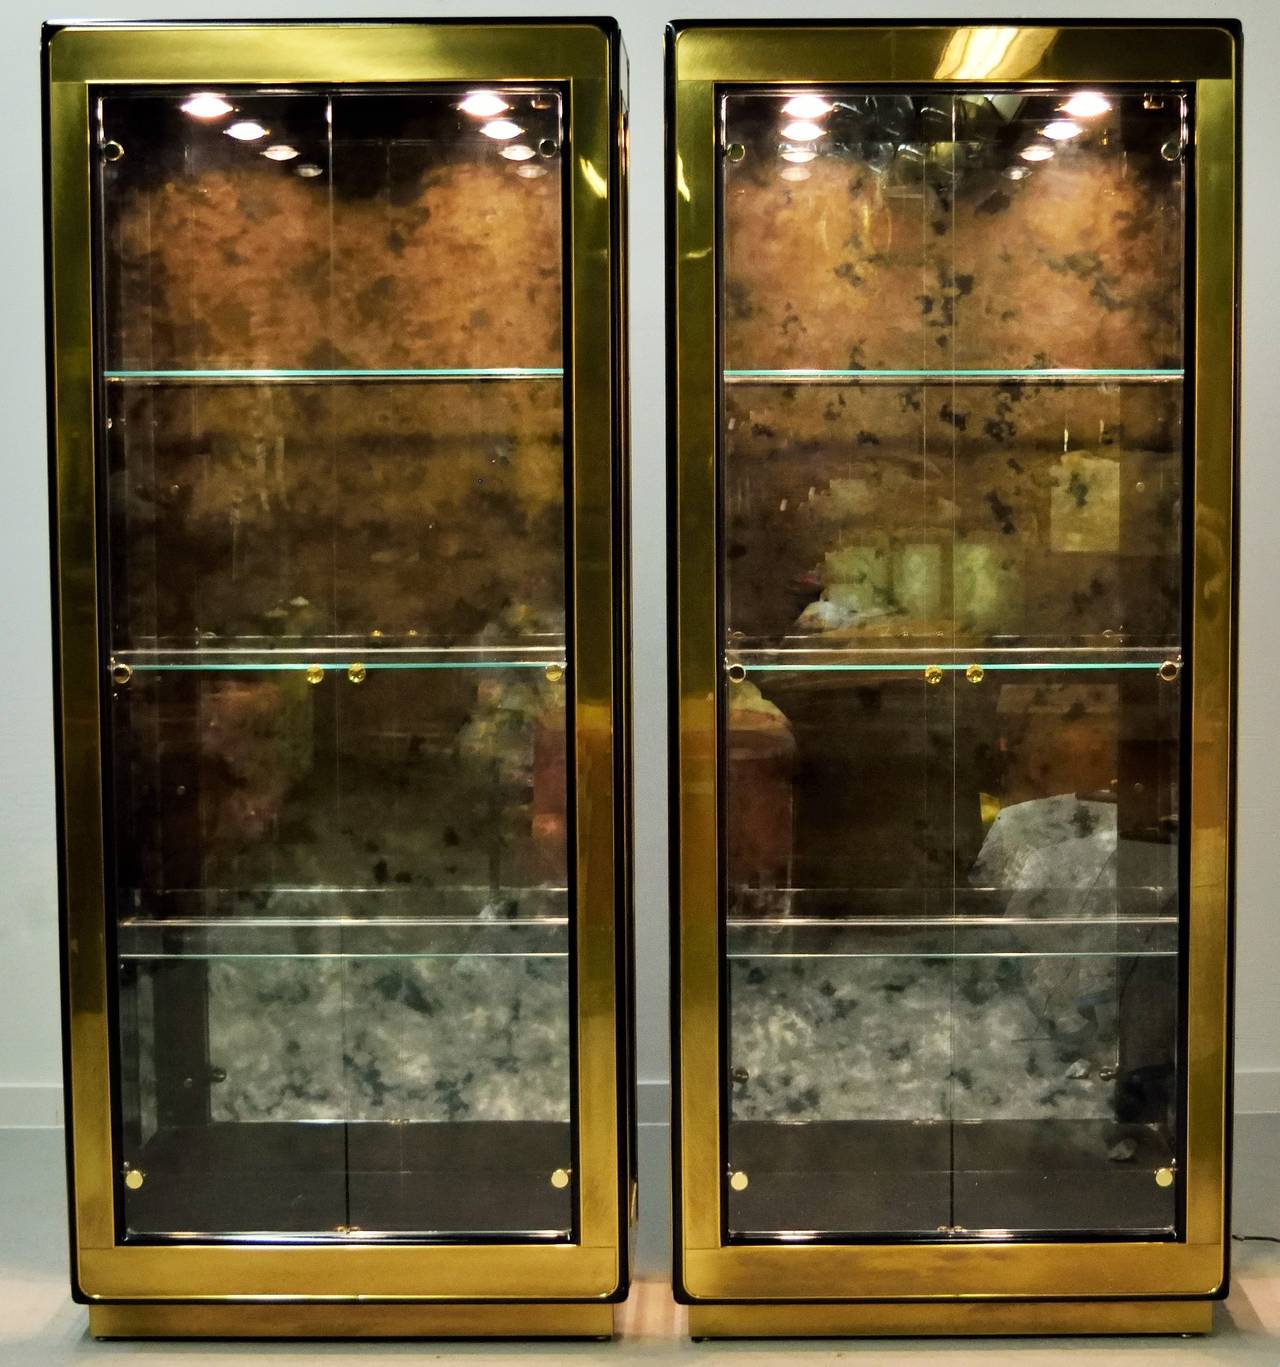 Both cabinets have recessed lighting. Antiqued mirror back panel detail with adjustable glass shelves. Glass front doors and glass side cabinet detail.